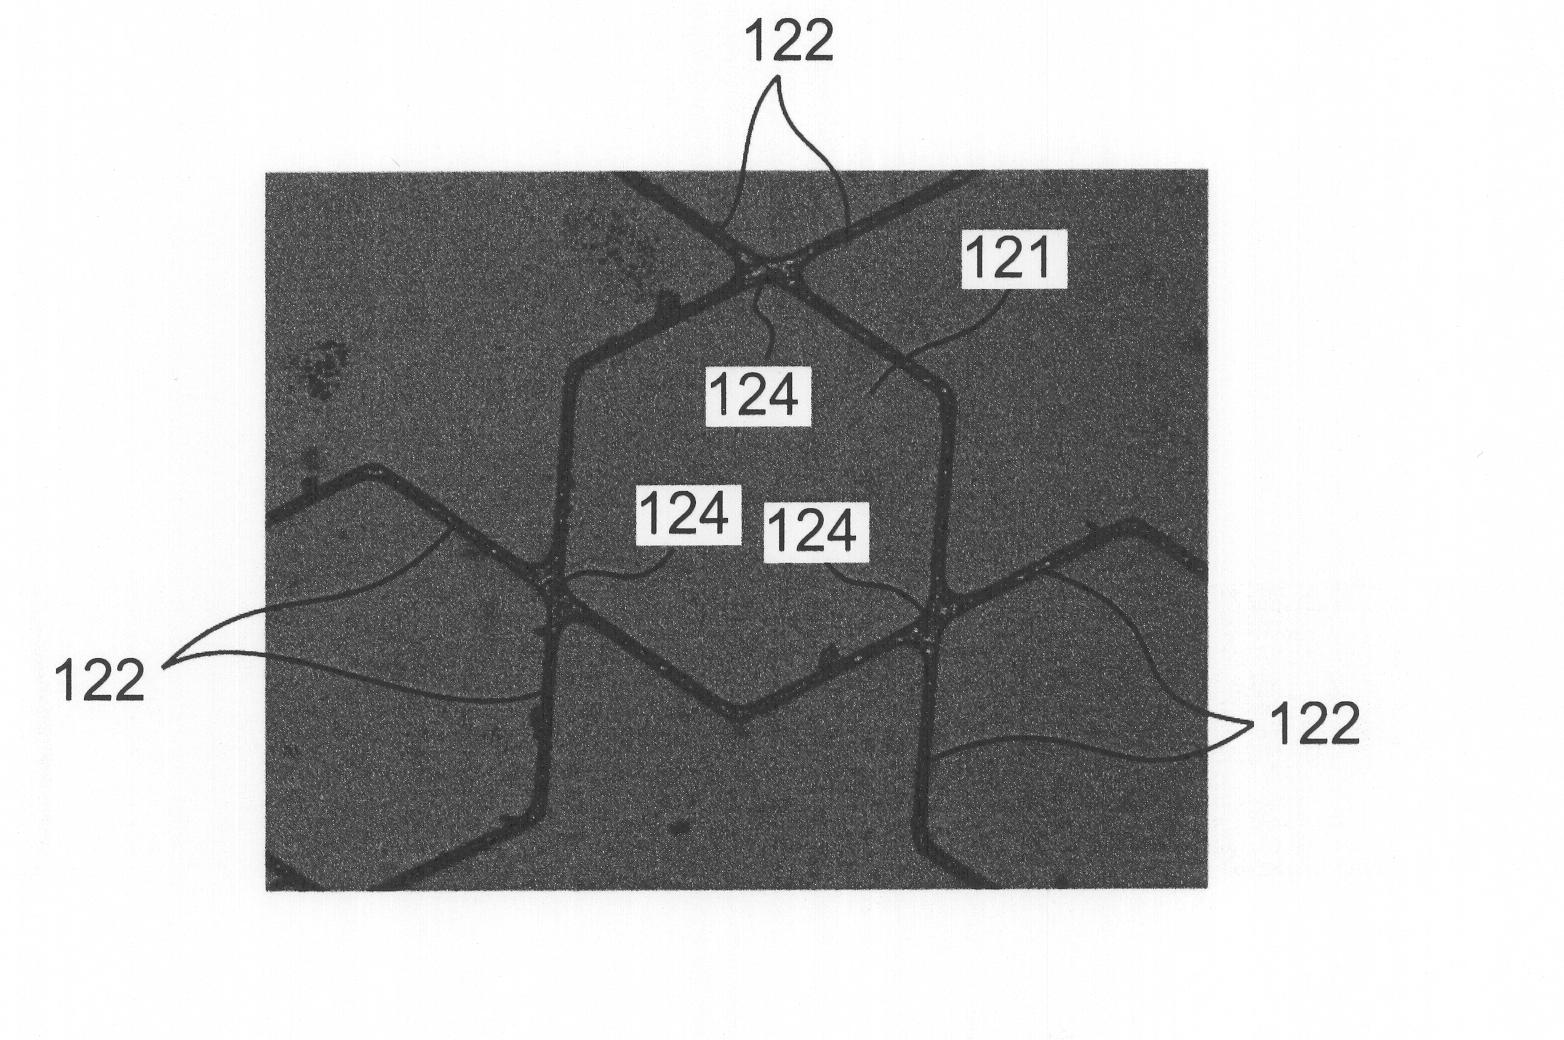 Mesh sheet and housing for electronic devices